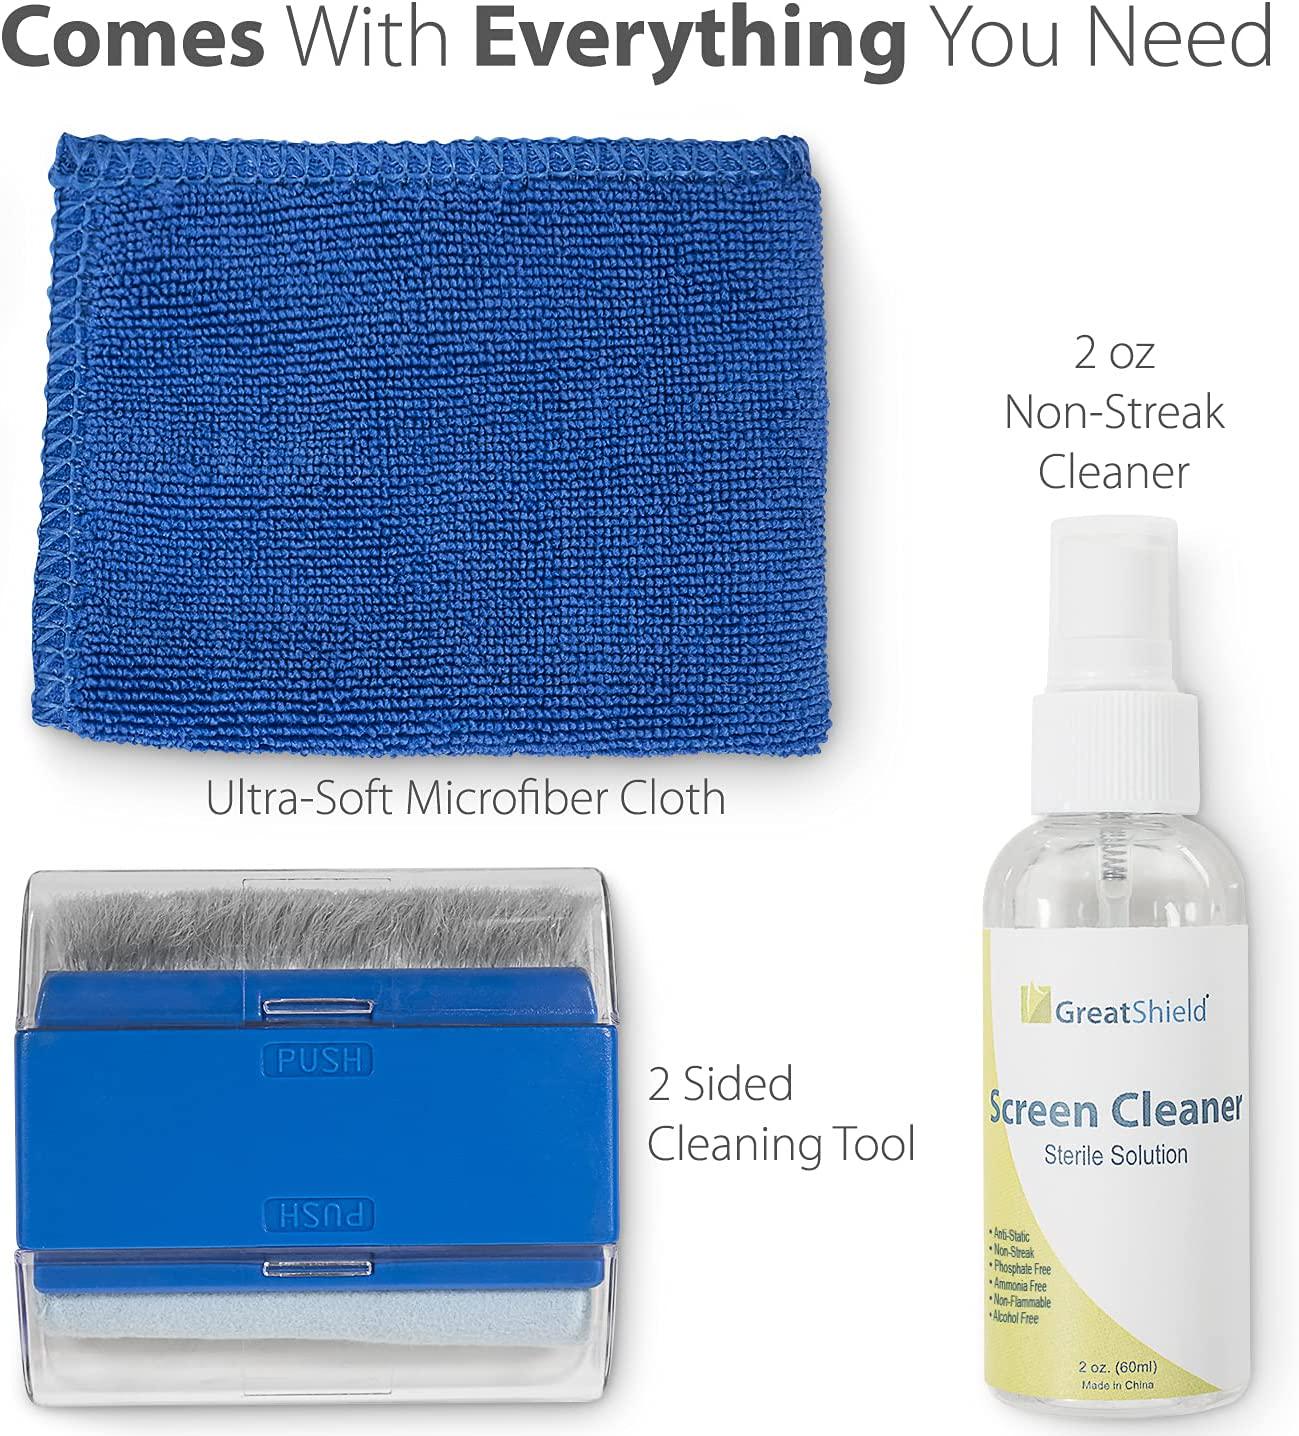 GreatShield, GreatShield LCD Touchscreen Cleaning Kit with Microfiber Cloth, Brush, Non-Alcoholic Spray Solution for Laptops, PC Monitors, Smartphones, Tablets, LED, TVs, DSLR Cameras, Camcorders